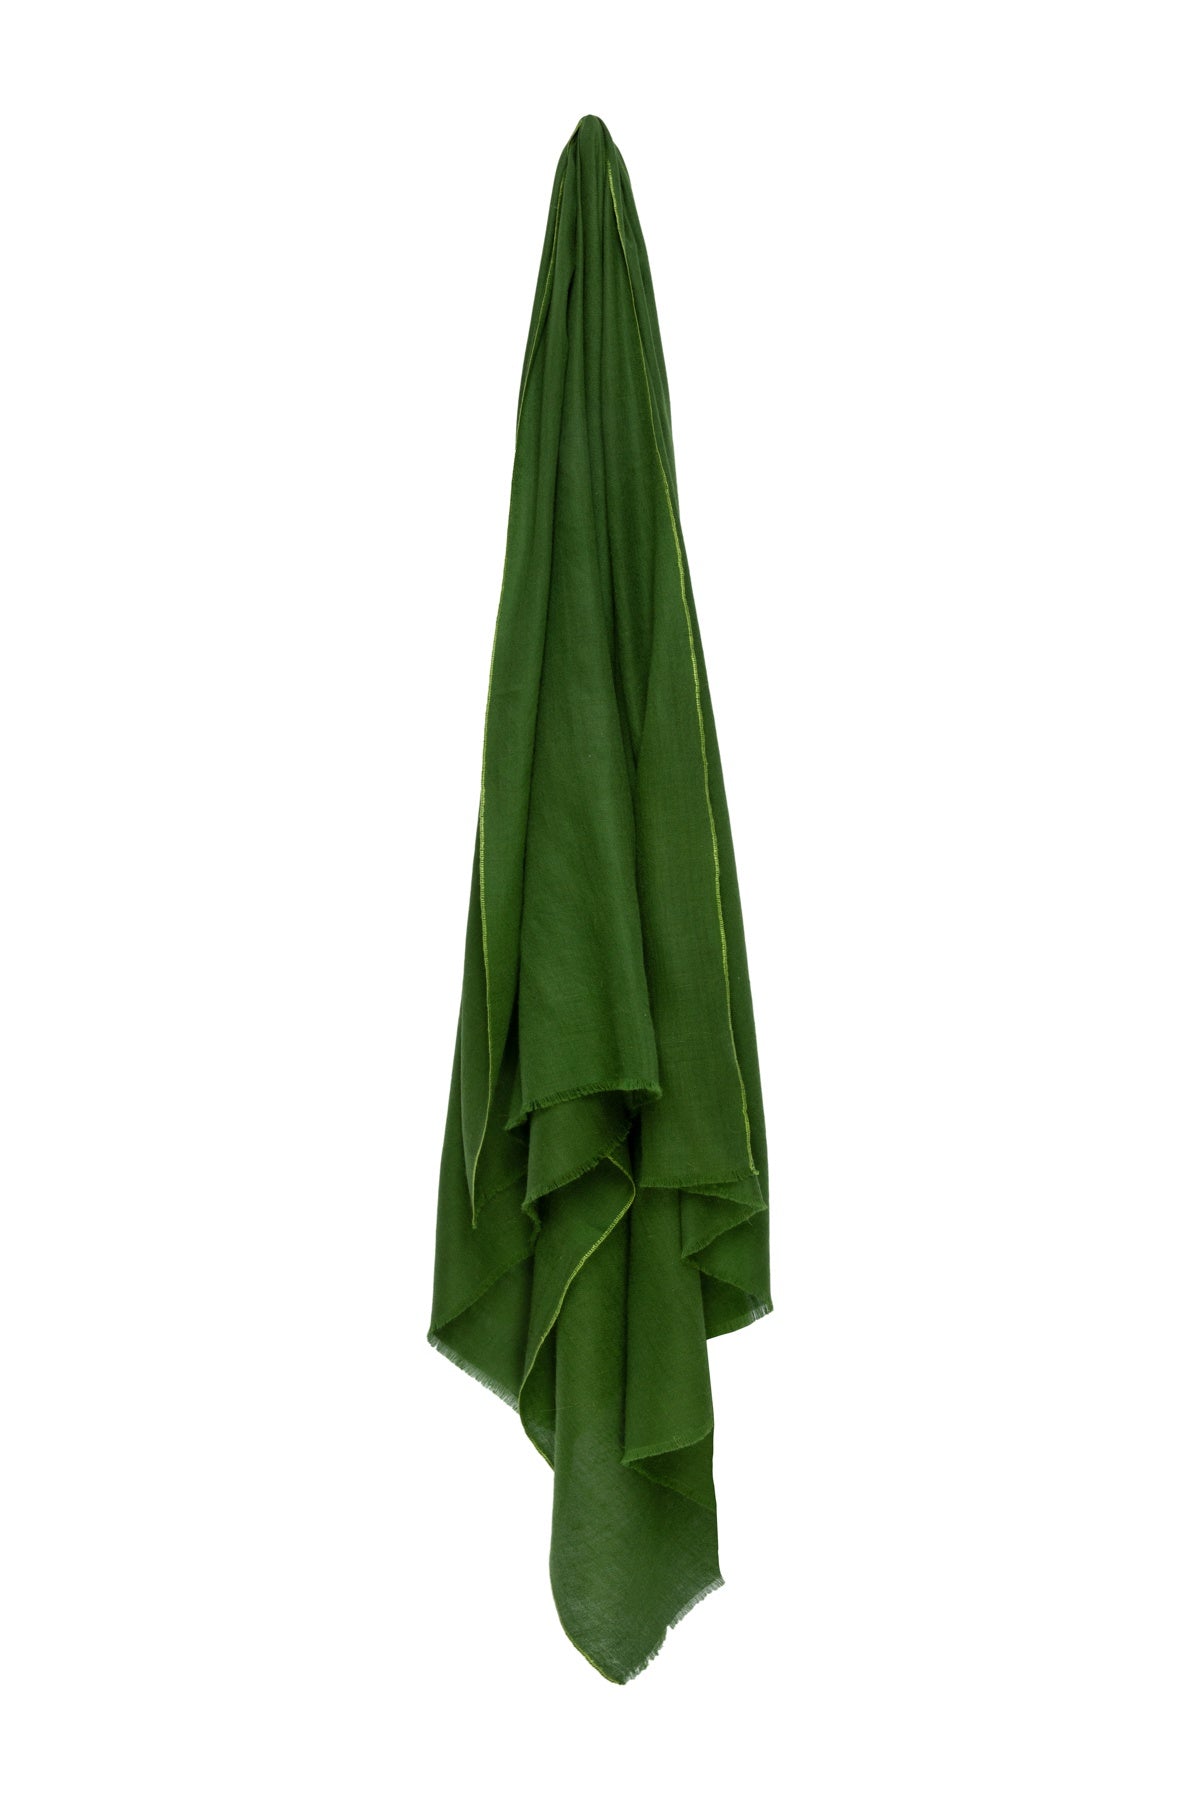 Classic Embroidered Edge Cashmere Pashmina Shawl - Hunting Green